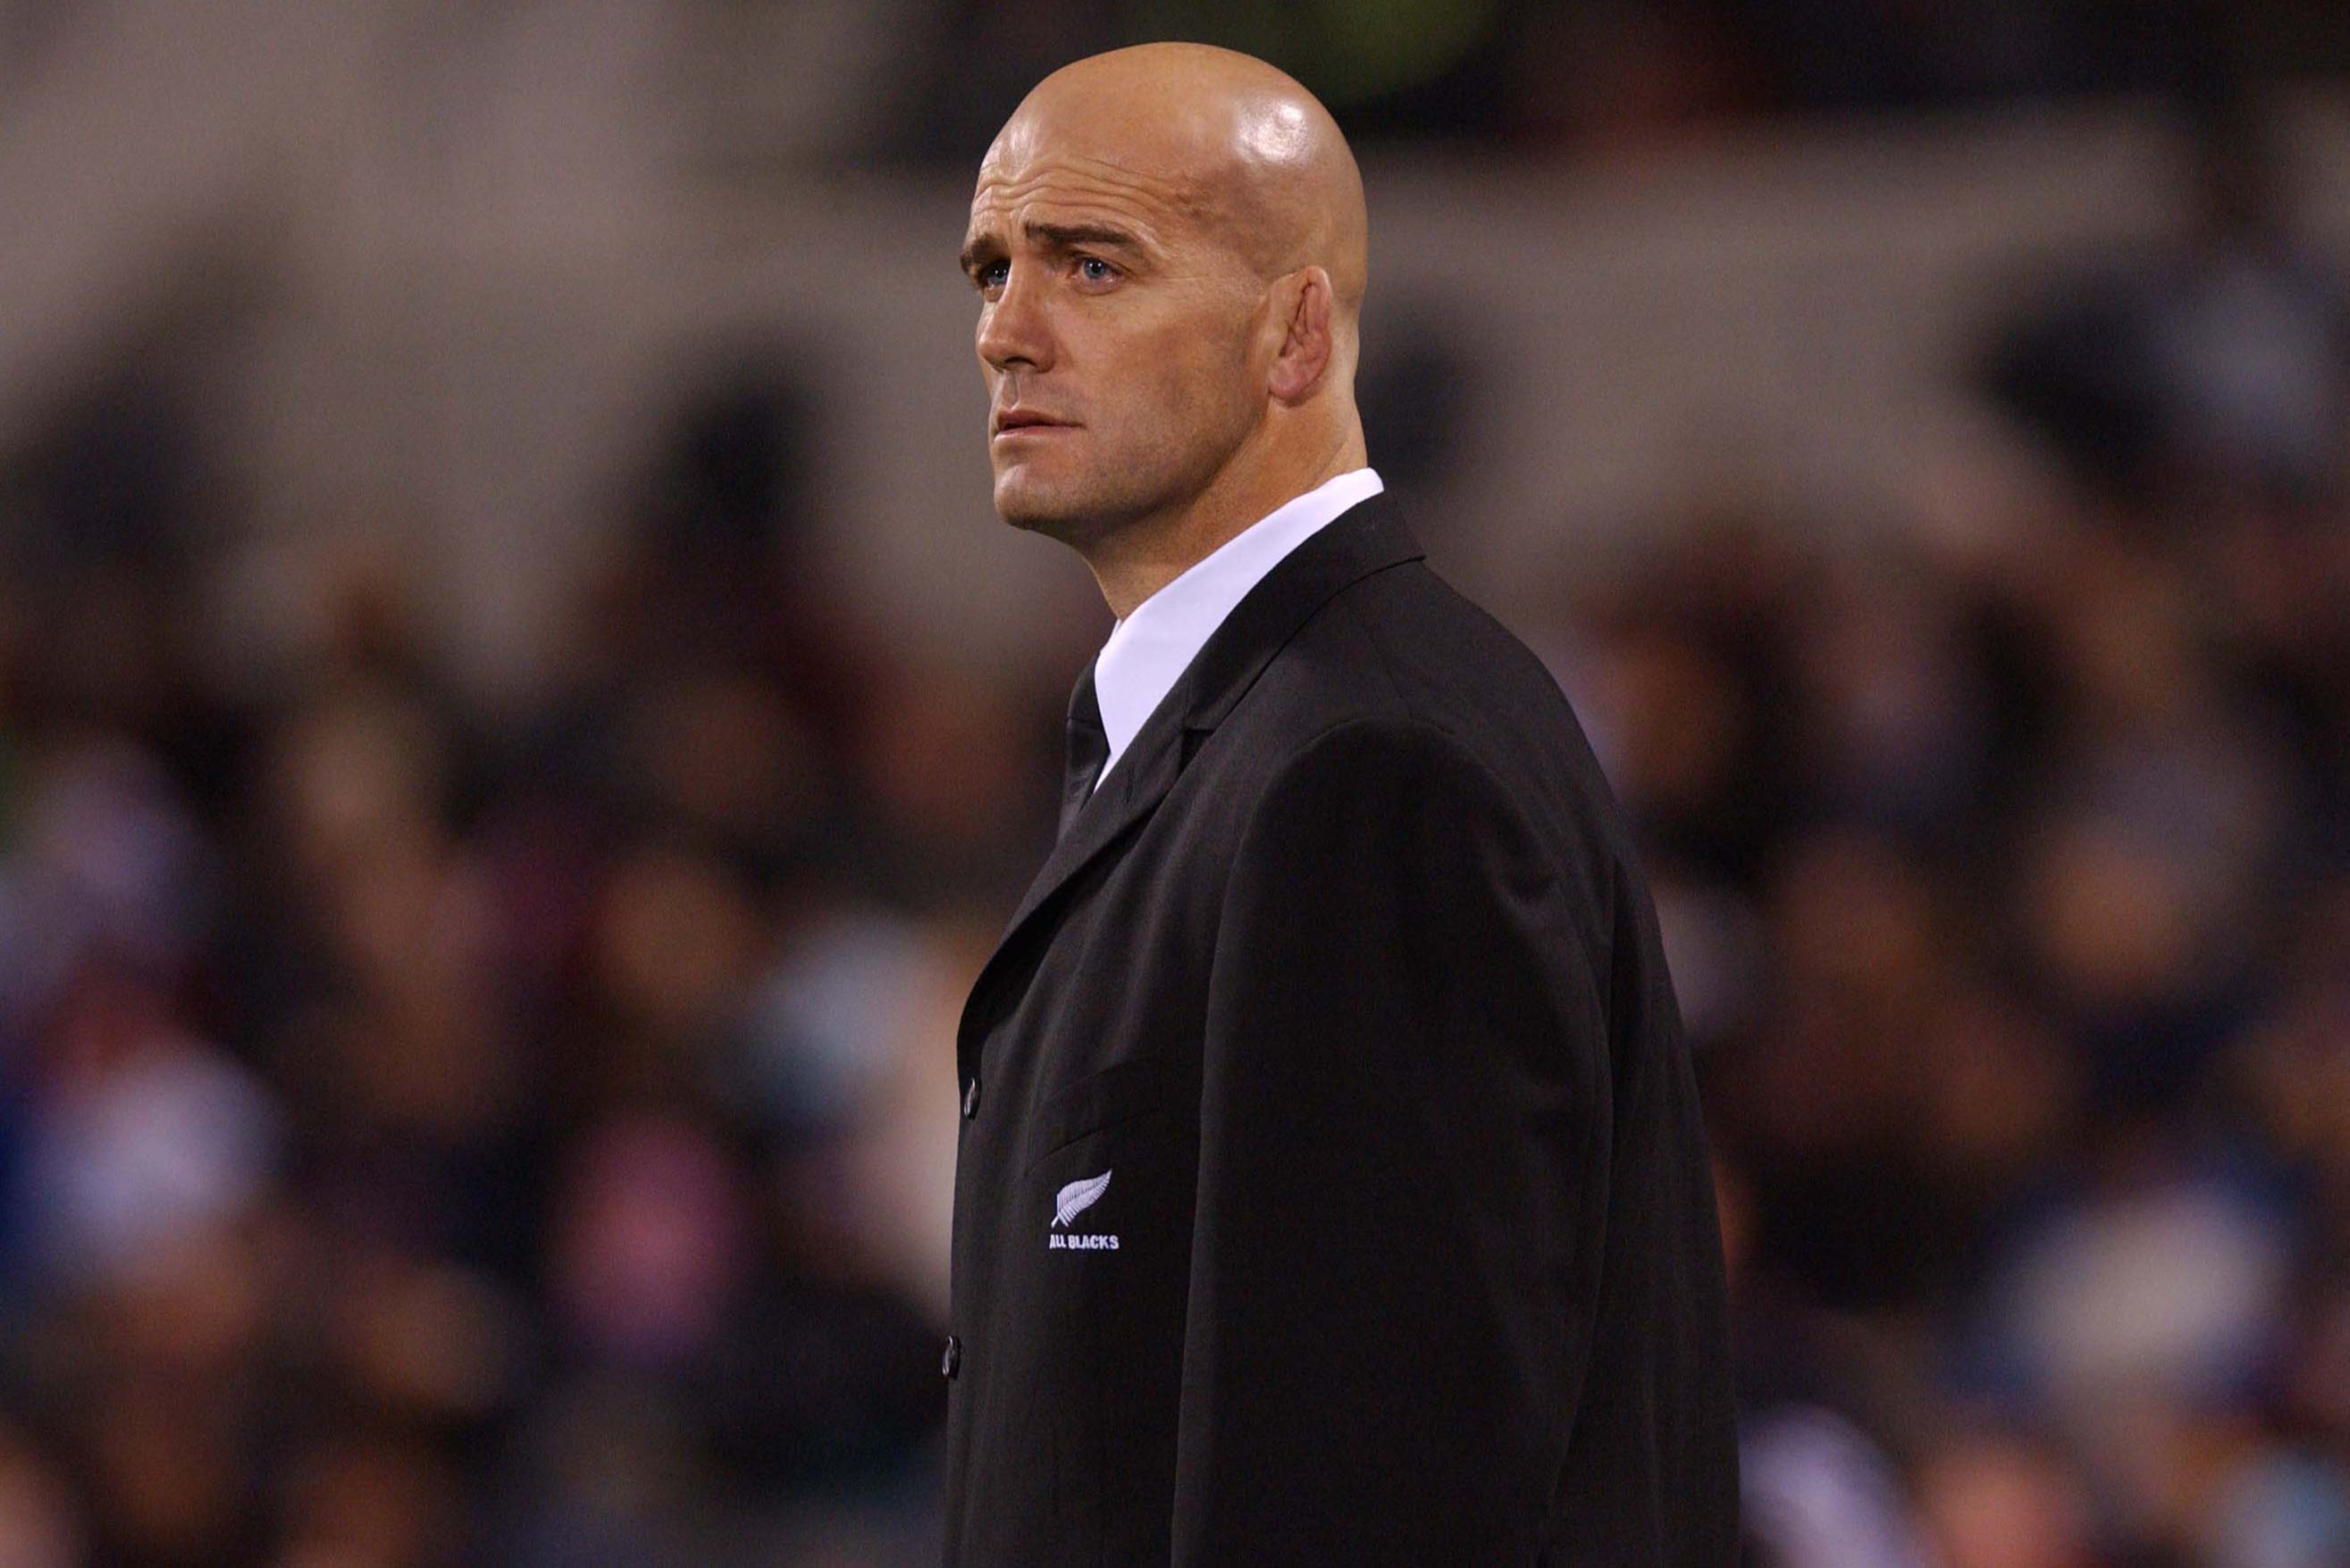 John Mitchell coached the All Blacks at the 2003 World Cup